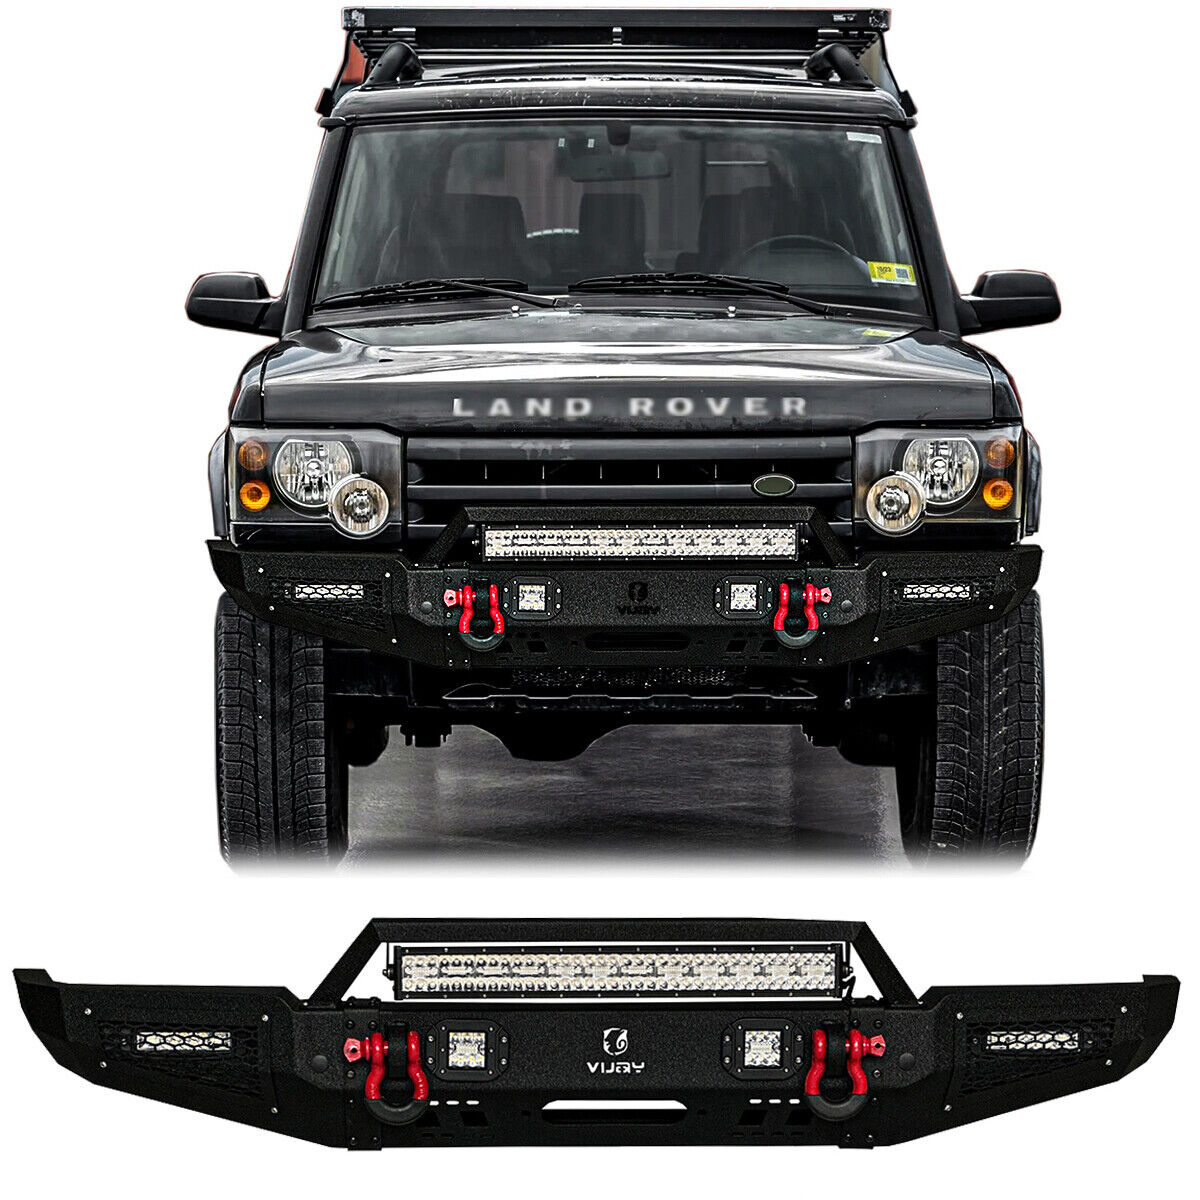 Vijay Fits 1999-2004 Land Rover Discovery II Front or Rear Bumper with lights